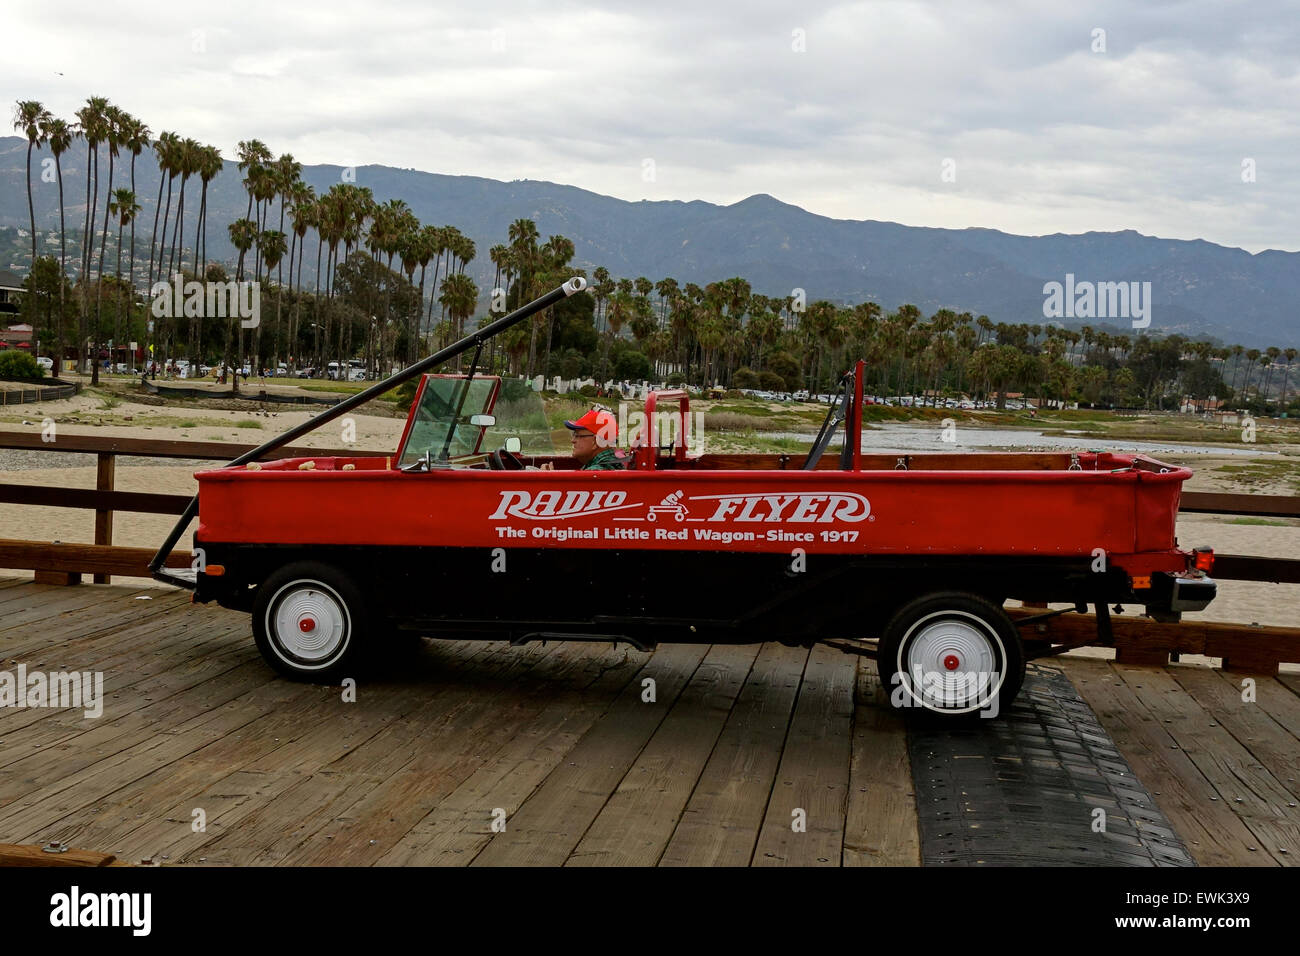 A Car Converted To Look Like A Radio Flyer The Original Little Red Wagon Drives Down Stearns Wharf In Santa Barbara California Stock Photo Alamy